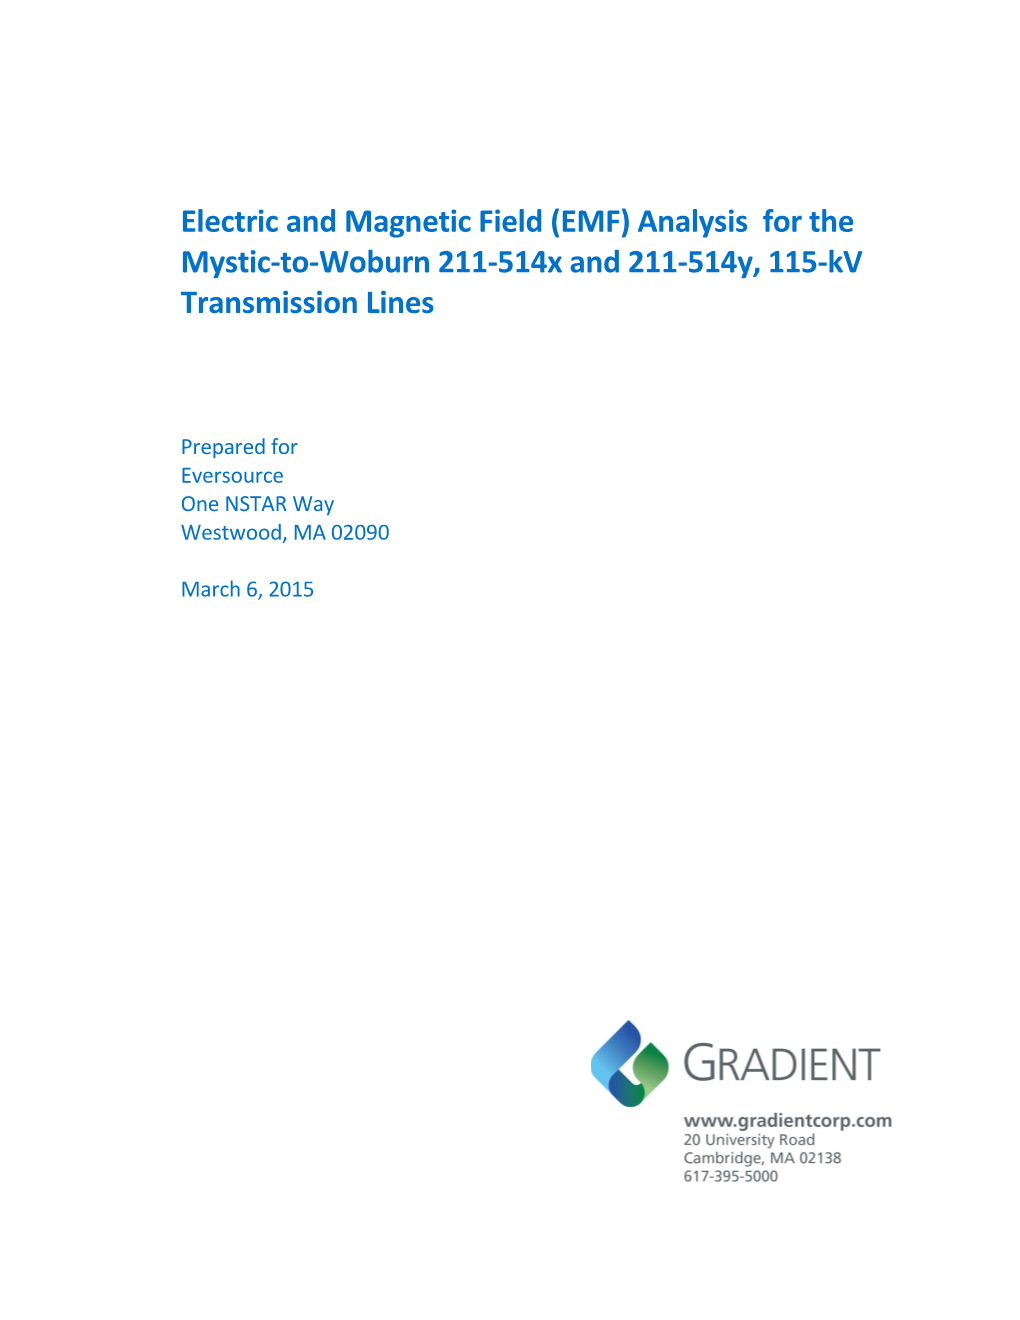 Electric and Magnetic Field (EMF) Analysis for the Mystic-To-Woburn 211-514X and 211-514Y, 115-Kv Transmission Lines